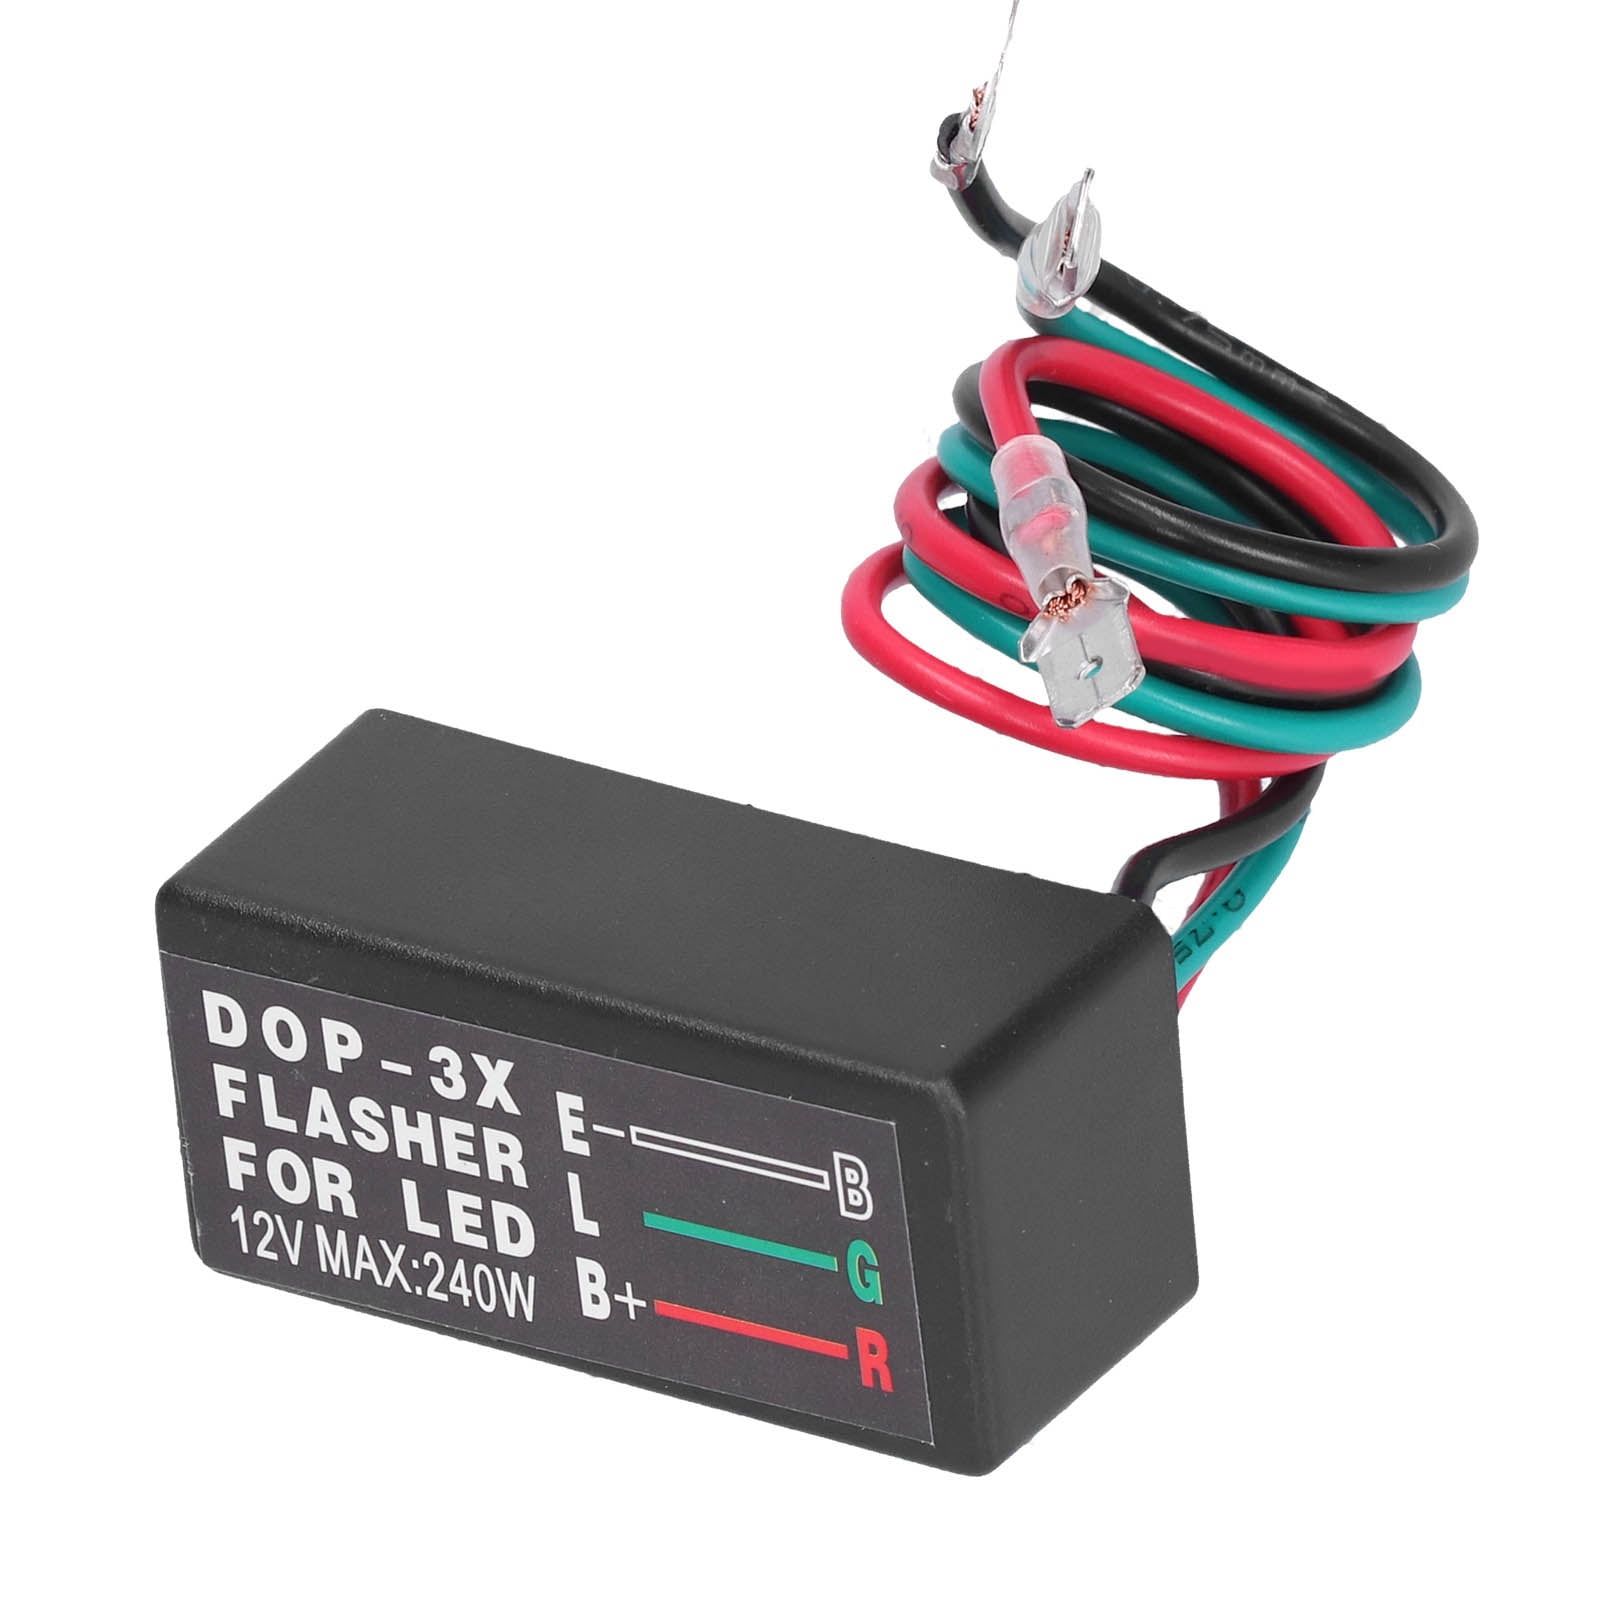 Loewten LED Flasher Module,Flash Relay DOP‑3X 12VDC 20A Universal LED Turn  Signal Flasher Relay For Car Motorcycle,Flasher Relay | Walmart Canada